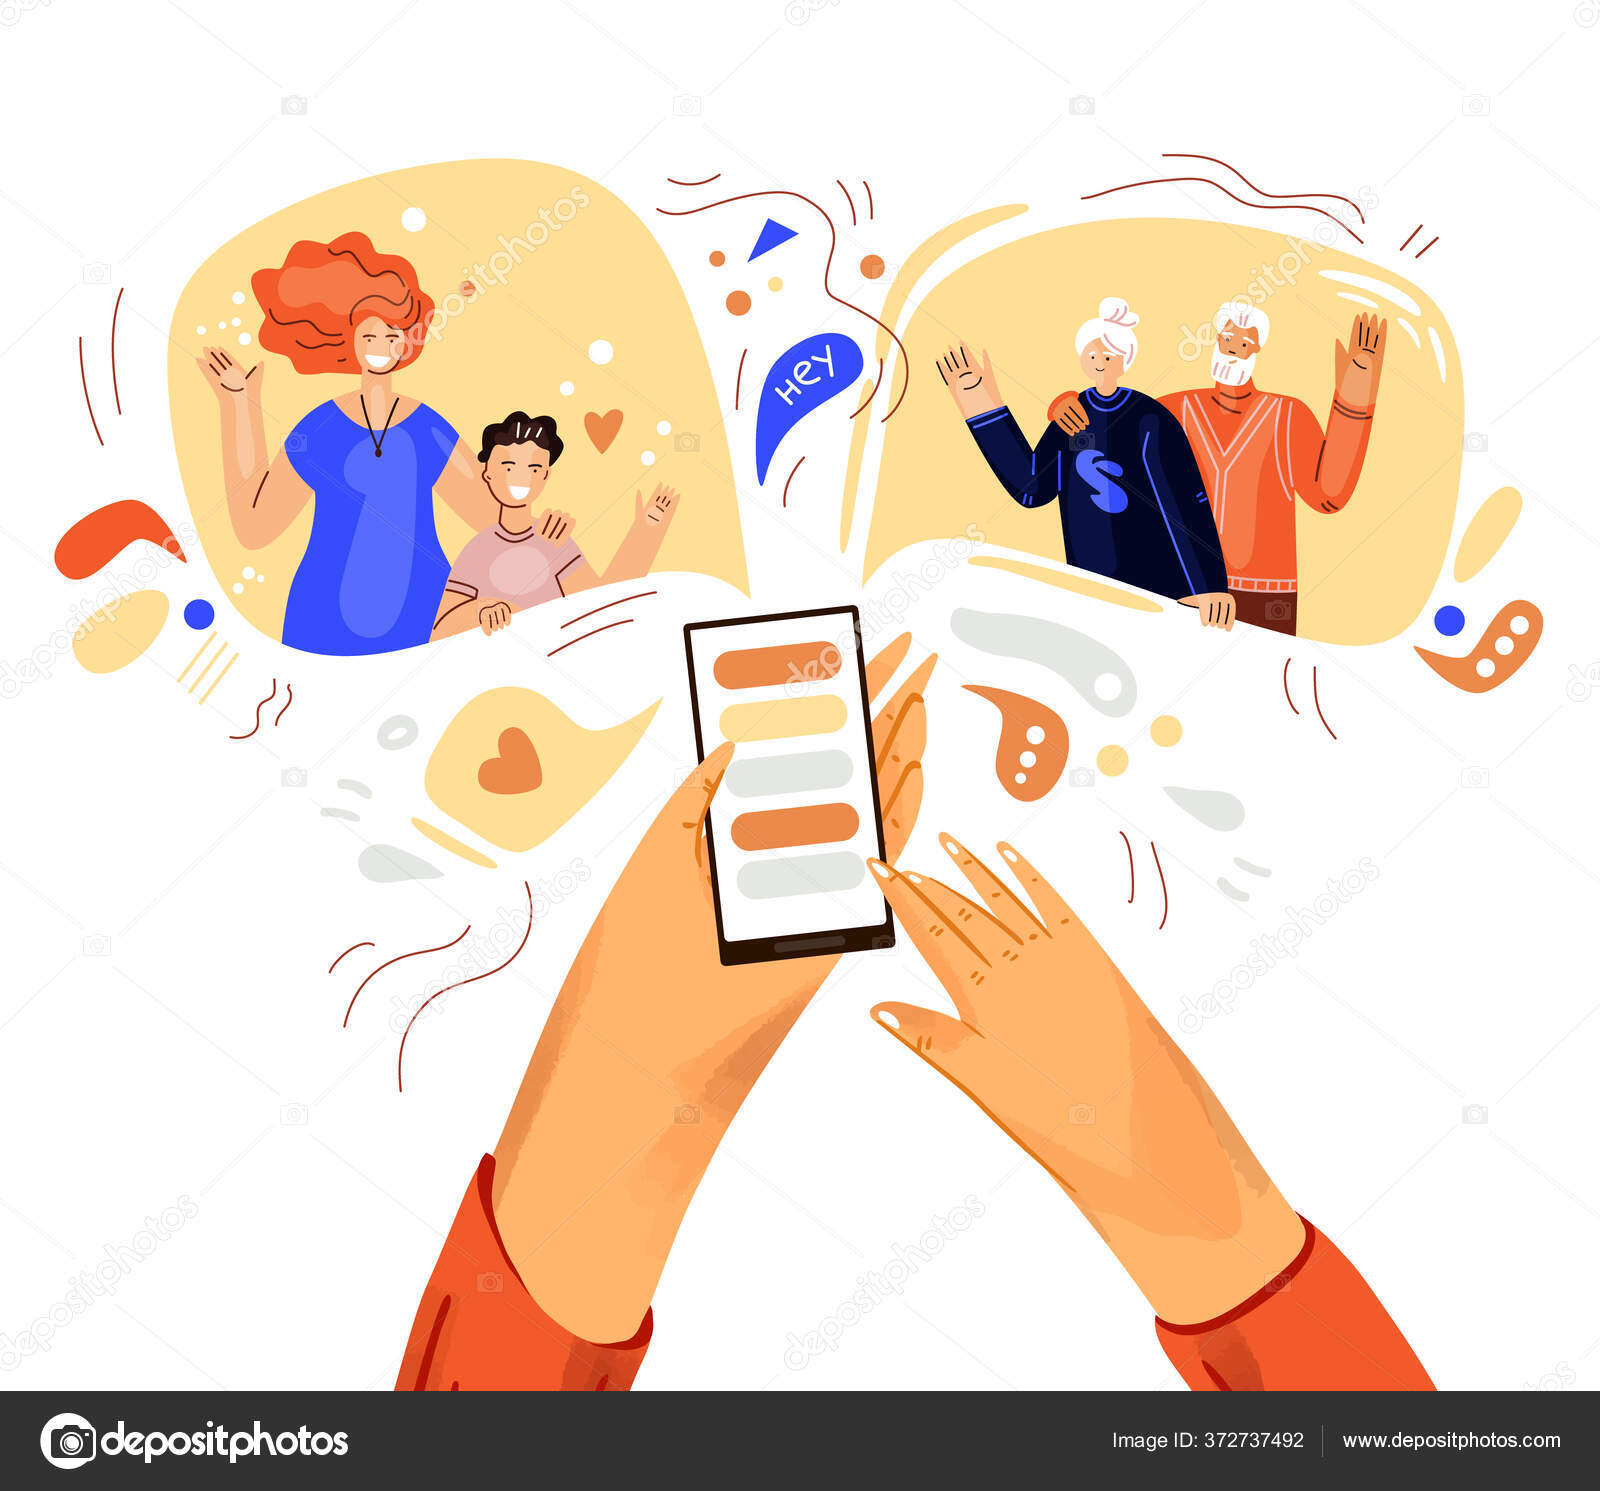 Video Call Between Friends, Chatting Online By Mobile App. Stay At Home,  Work, Communication Remotely. Hand Holding Smartphone. Group Of People On  Device Screen. Internet Messenger Vector Illustration Royalty Free SVG,  Cliparts